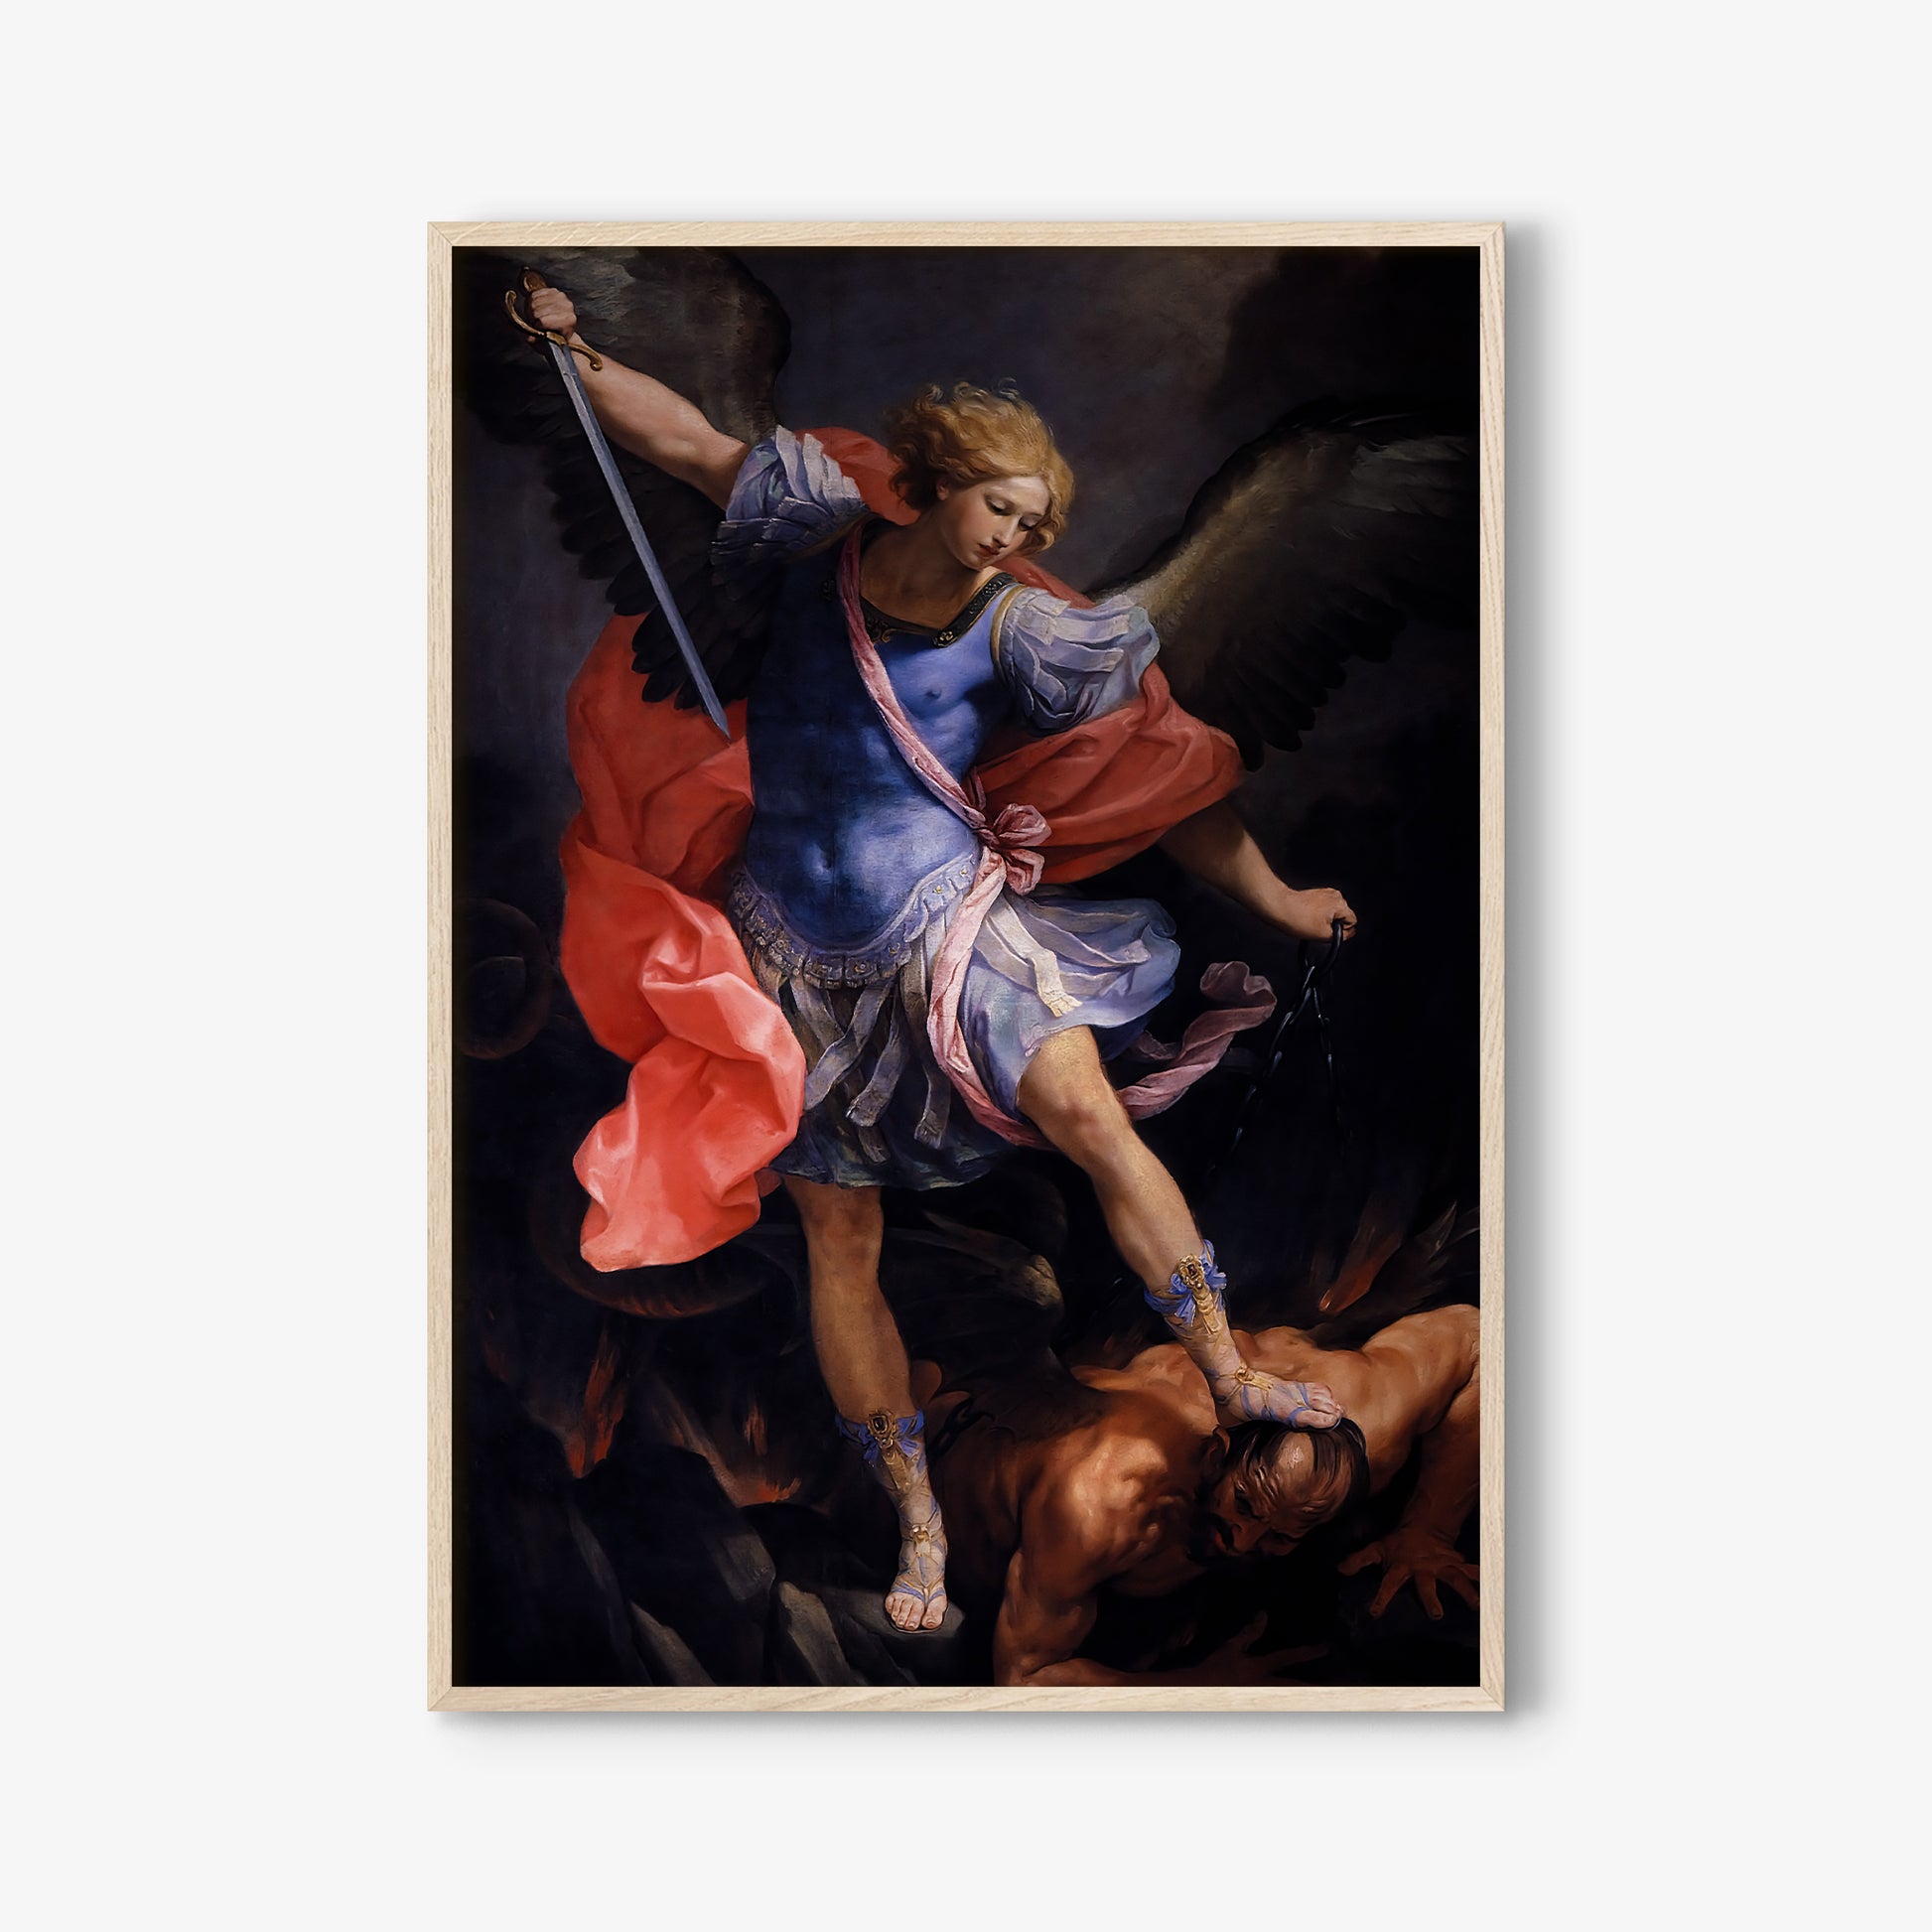 Be inspired by our classic art print Archangel Michael Defeats Satan by Guido Reni. This artwork was printed using the giclée process on archival acid-free paper and is presented in a white oak frame that captures its timeless beauty in every detail.